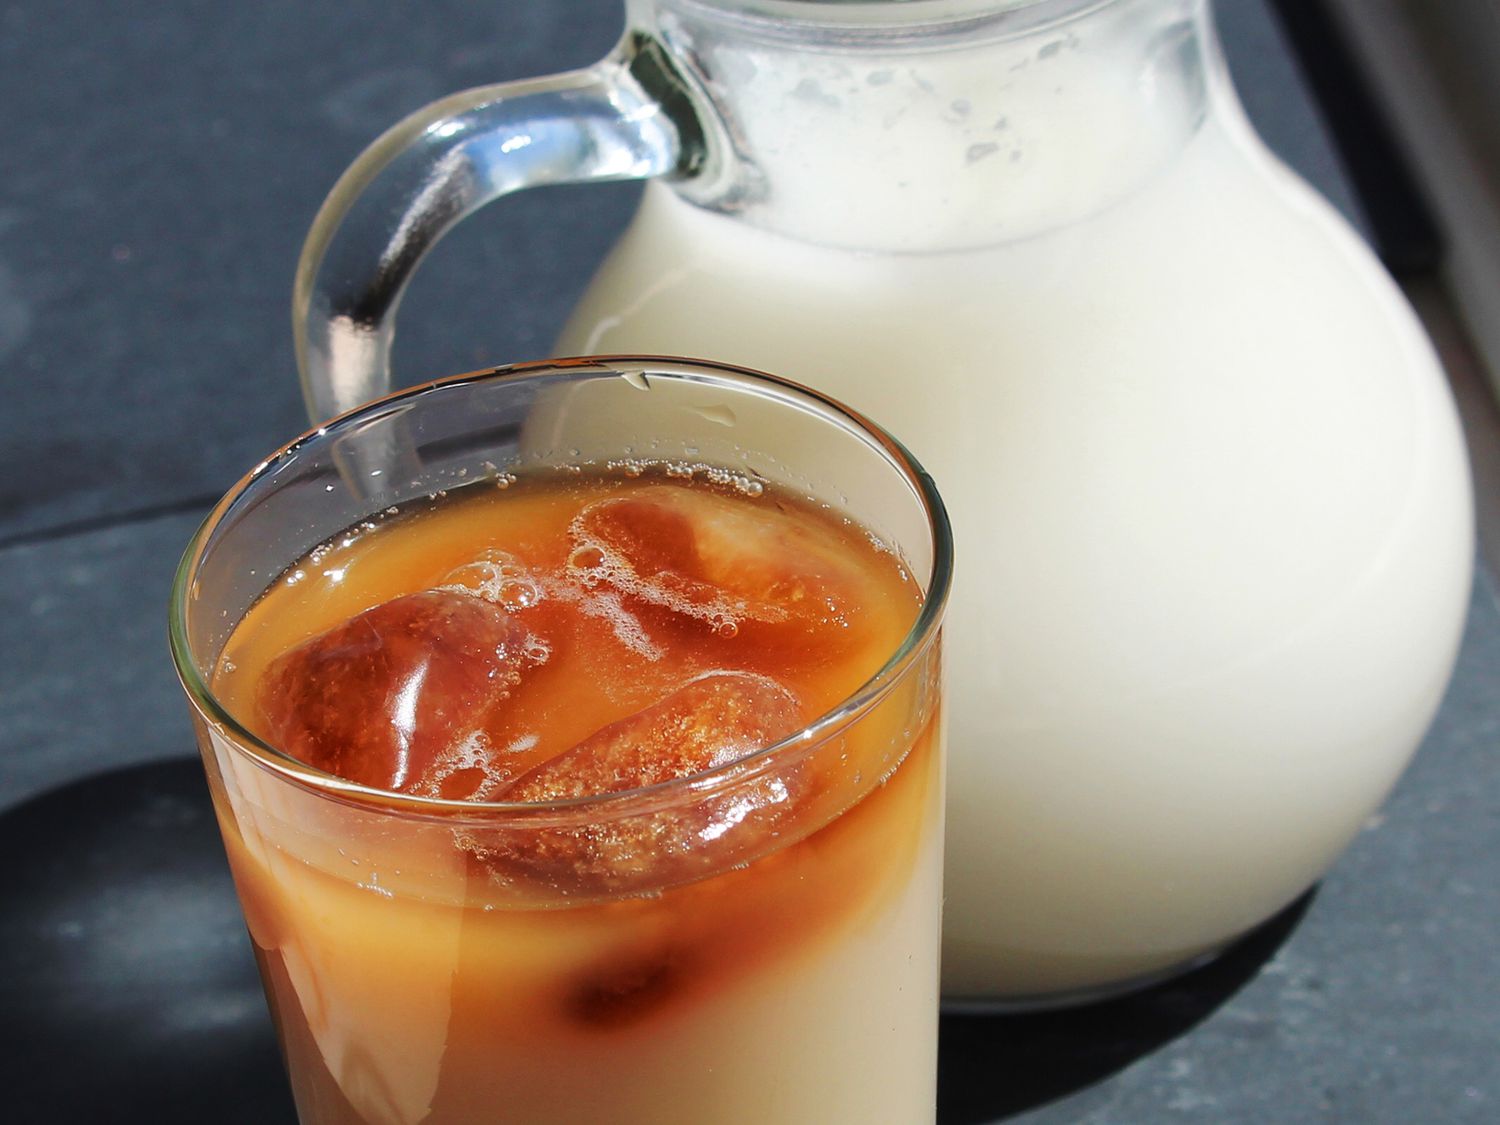 close up view of Horchata with coffee in a glass and Horchata in a pitcher